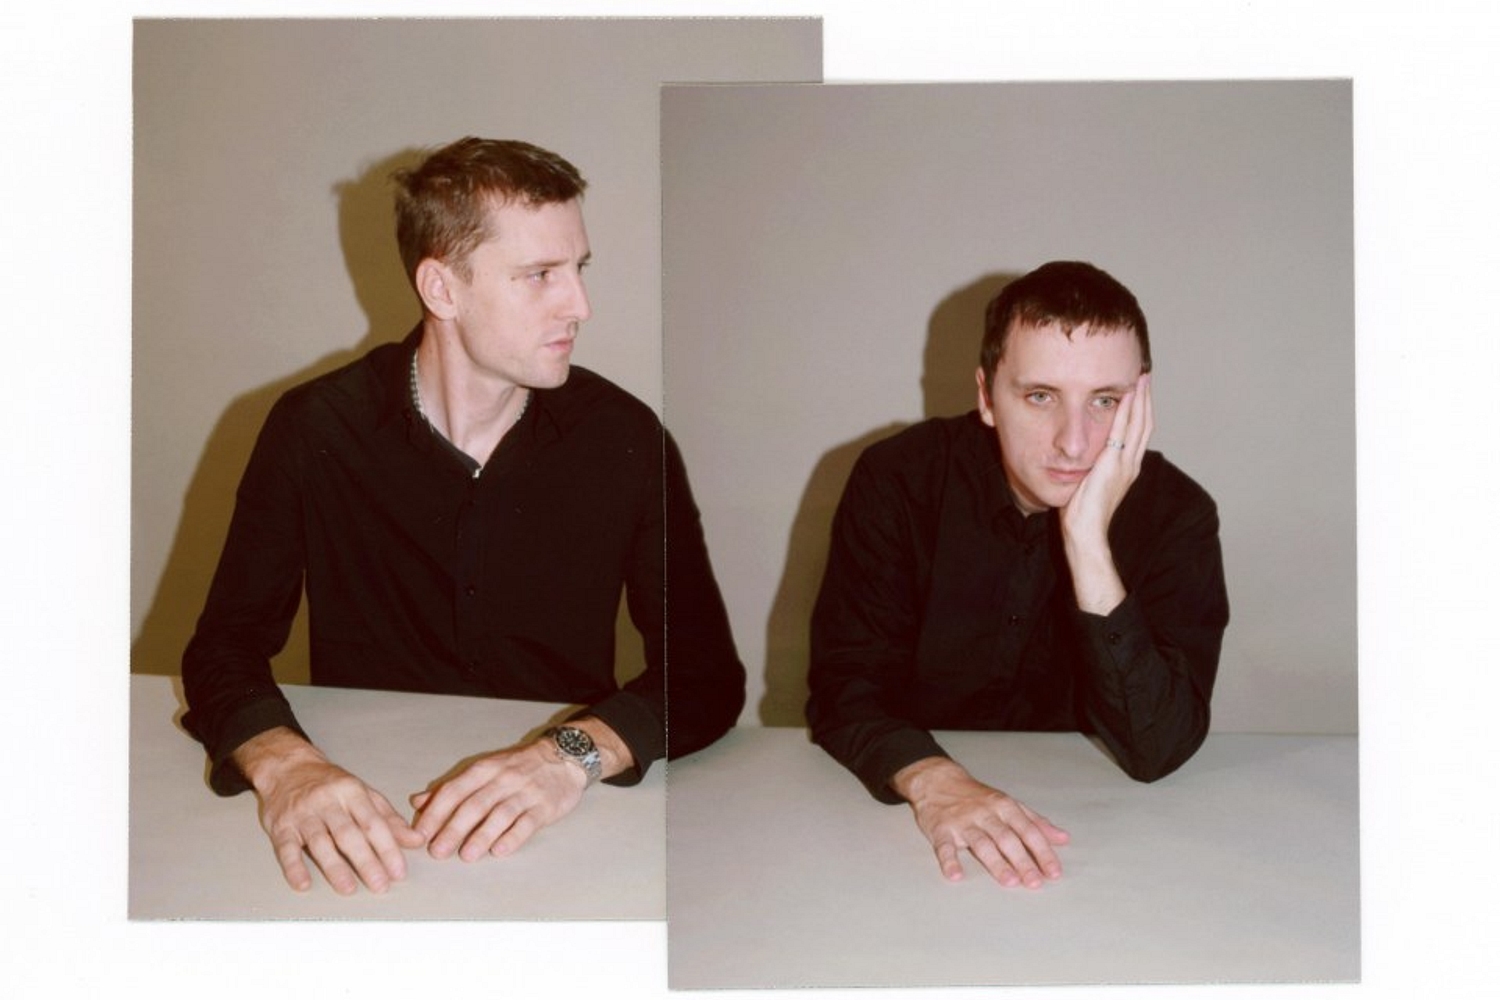 These New Puritans share details of livestream performance